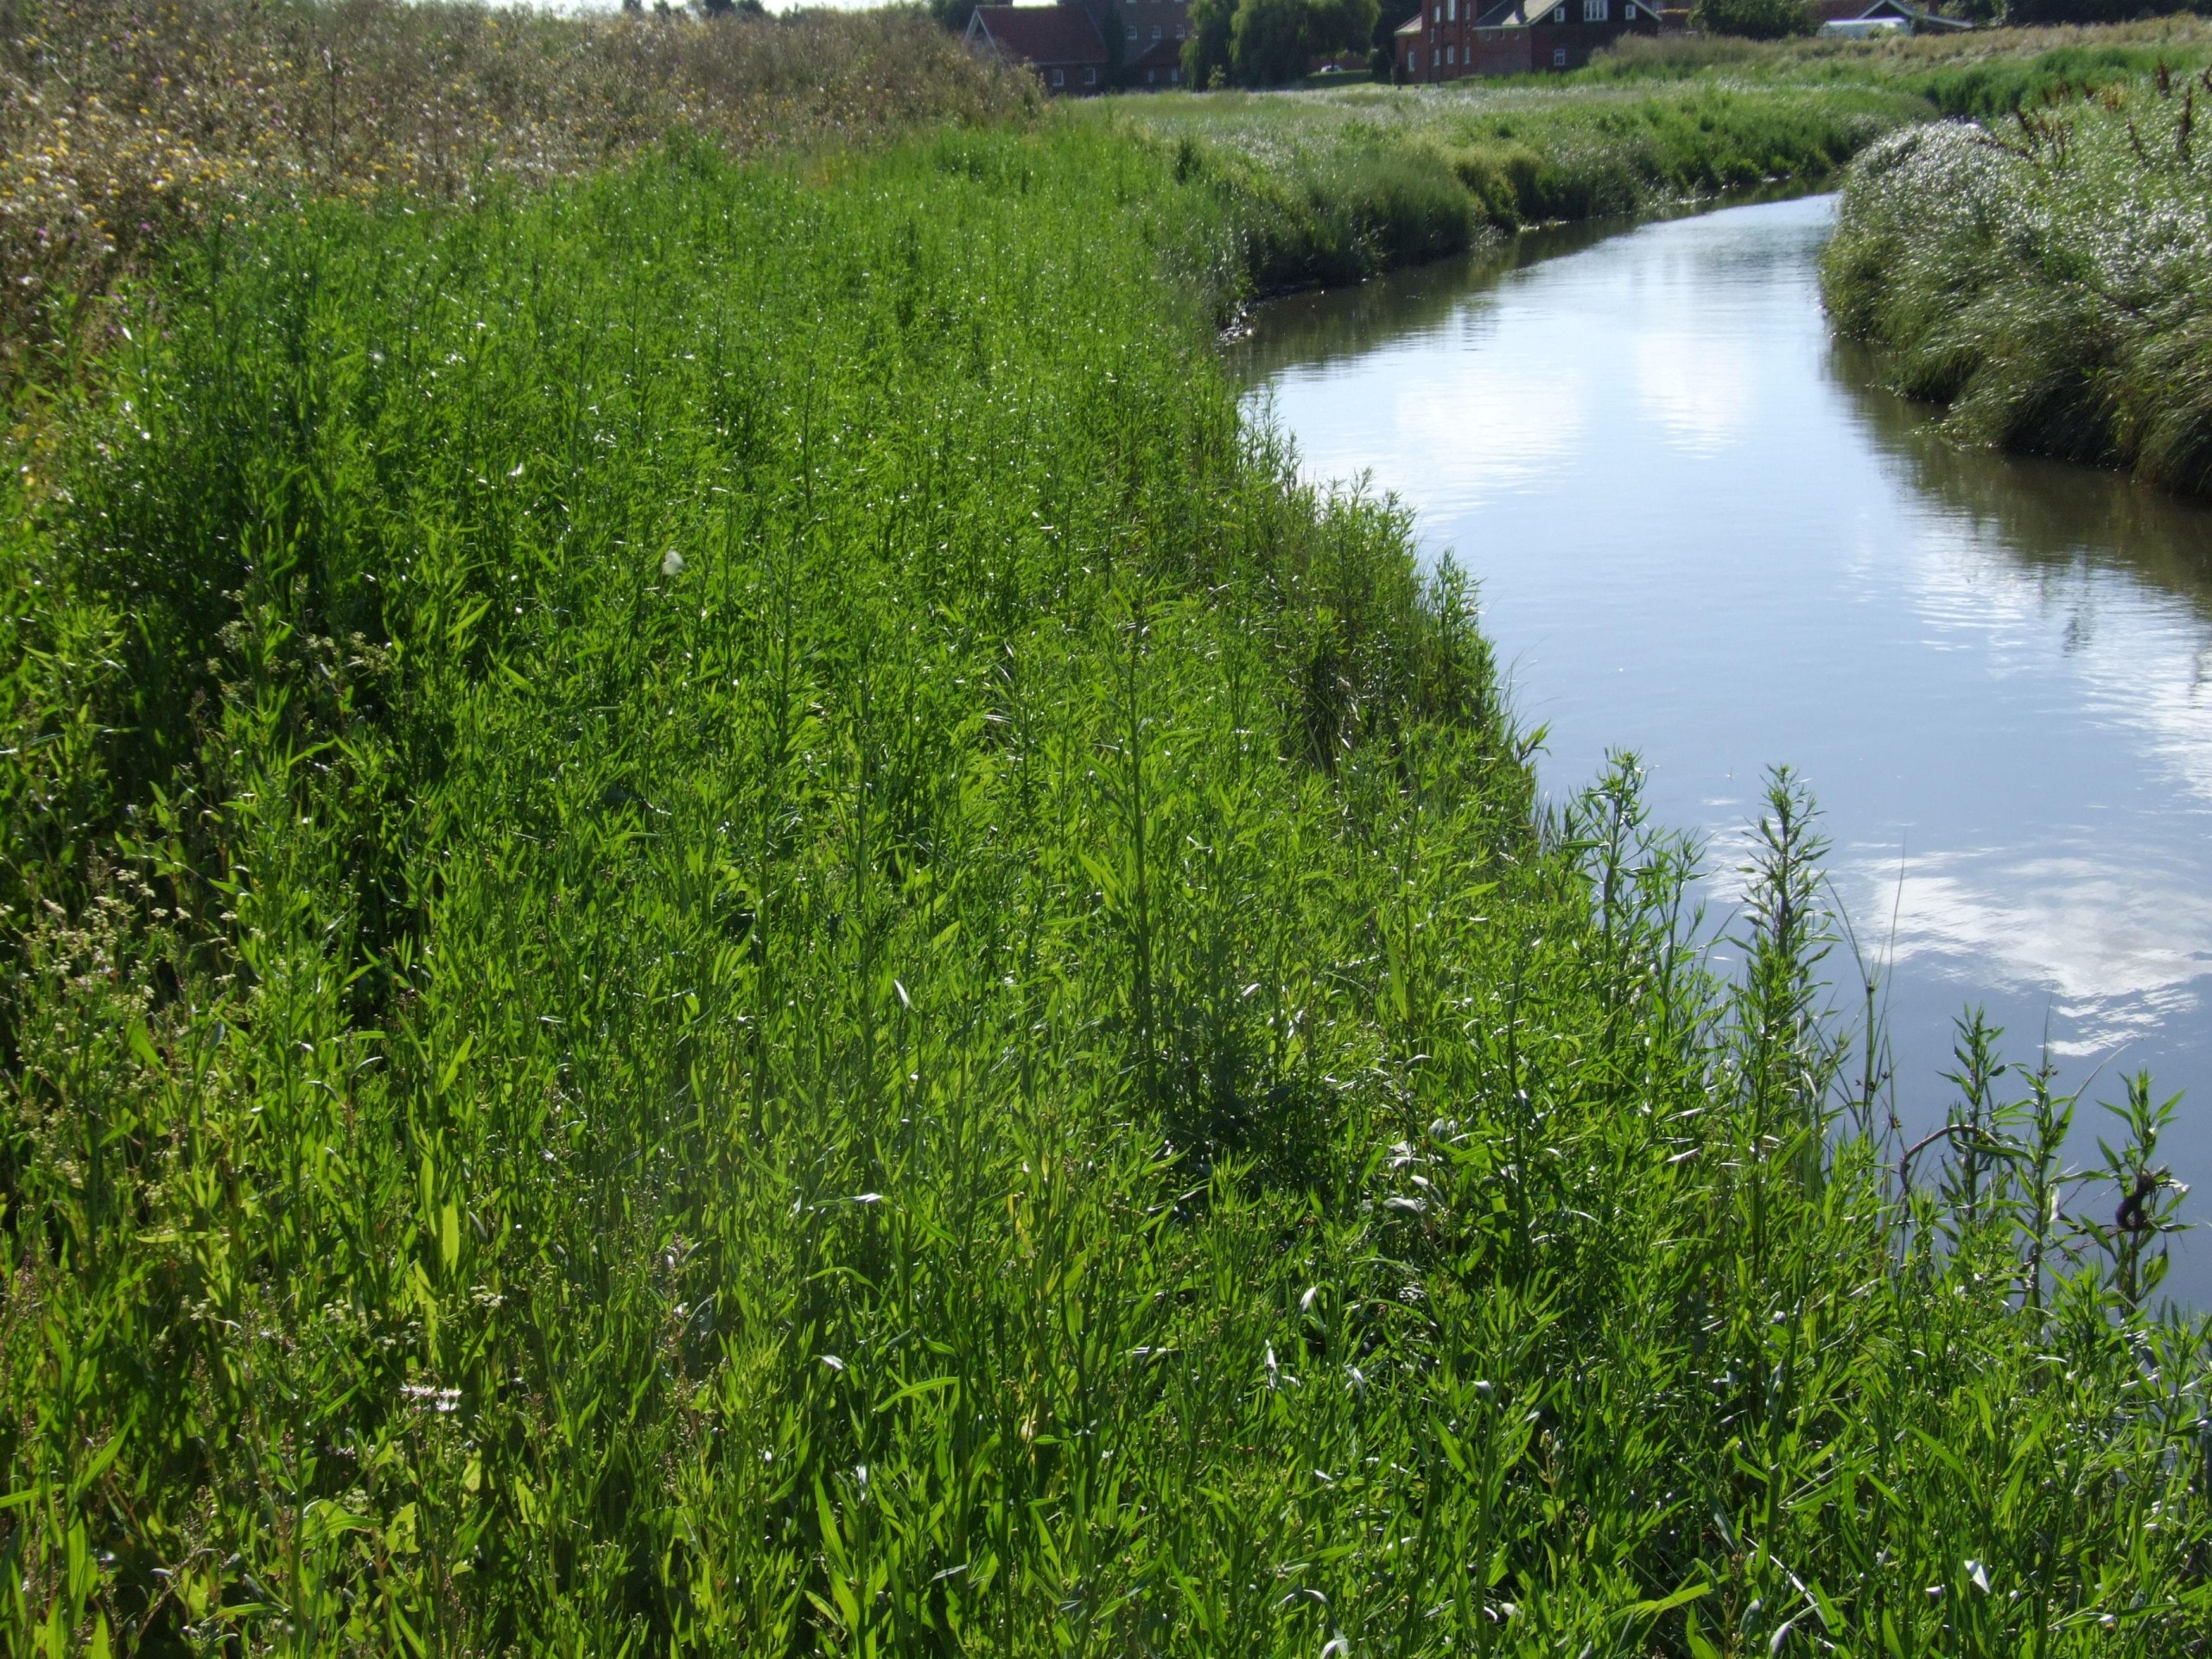 Brushwood fascines and pre-established coir pallets planted with Bolboschoenus maritimus to protect a newly regraded flood defence embankment at Battlesbridge, Essex, UK. A biodegradable erosion control blanket has been used to stabilise the upper bank.